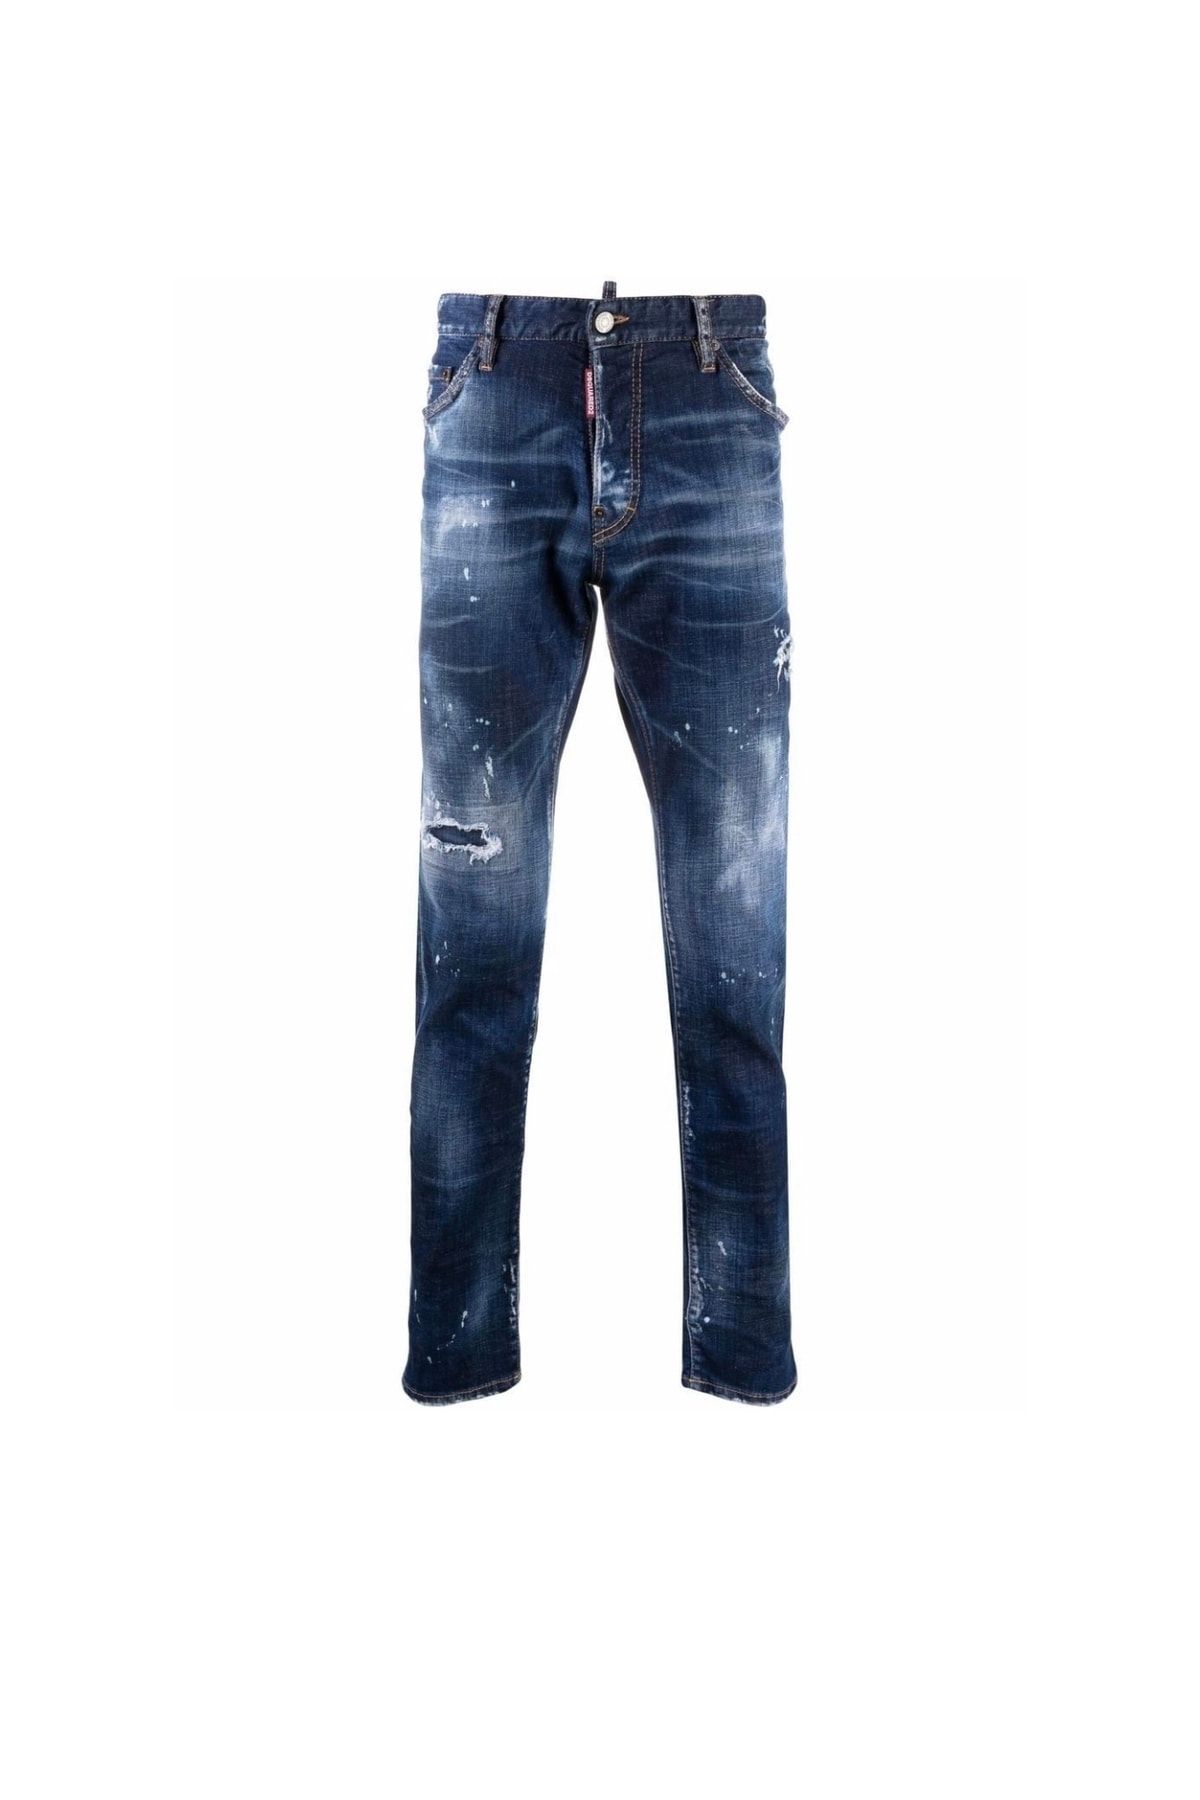 DSquared2 Distressed Straight-leg Jeans